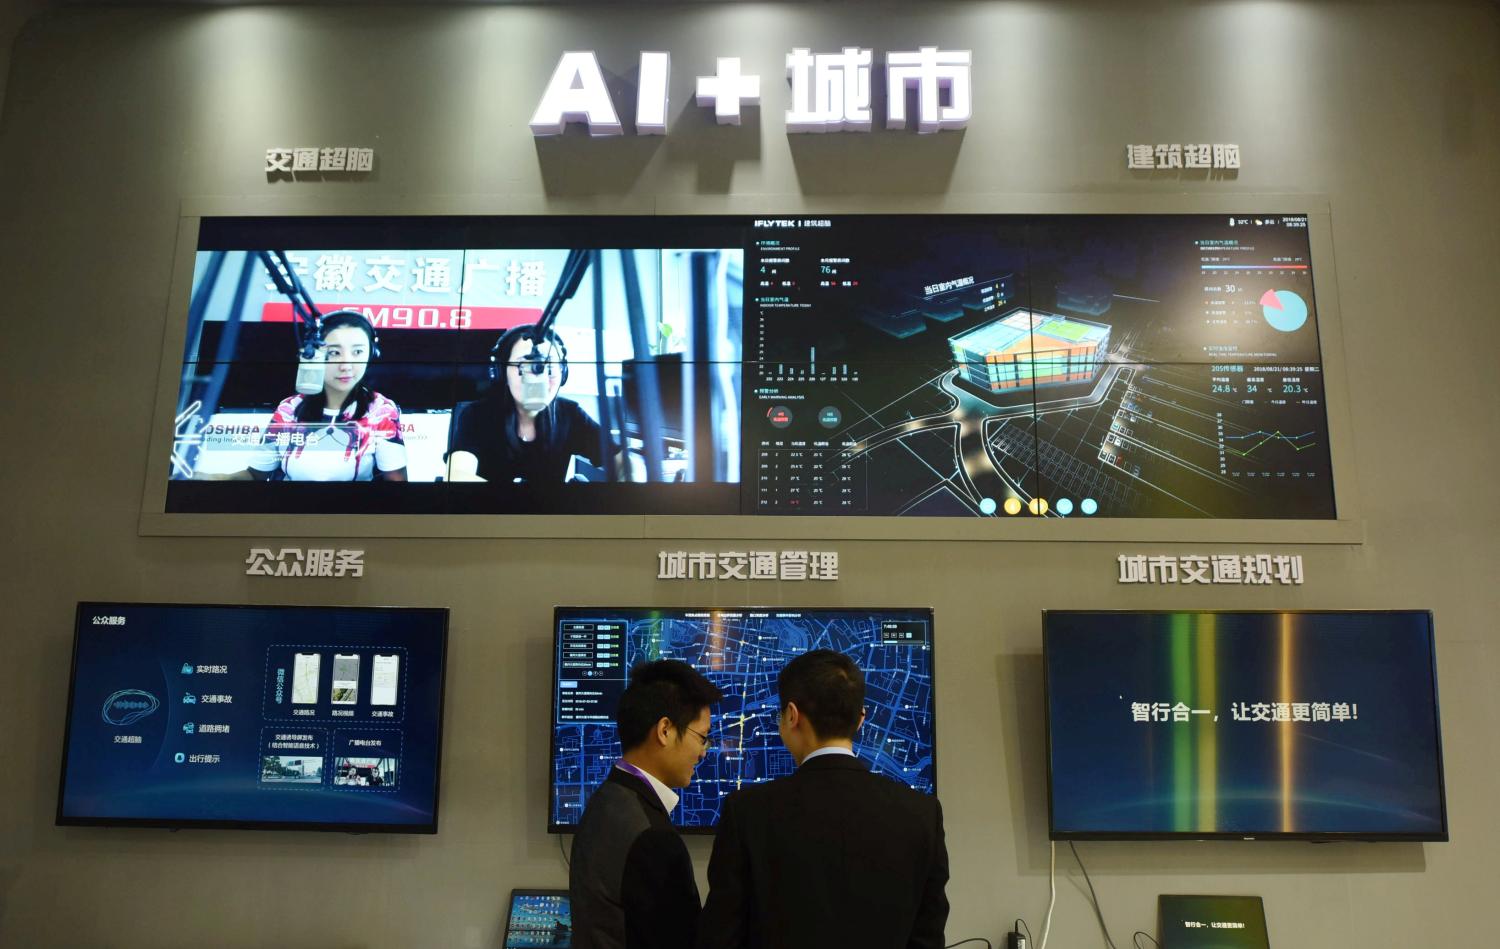 Men visit iFlytek's artificial intelligence (AI) smart city display at the International Intelligent Transportation Industry Expo in Hangzhou, Zhejiang province, China December 21, 2018. REUTERS/Stringer  ATTENTION EDITORS - THIS IMAGE WAS PROVIDED BY A THIRD PARTY. CHINA OUT. - RC1E35A070C0